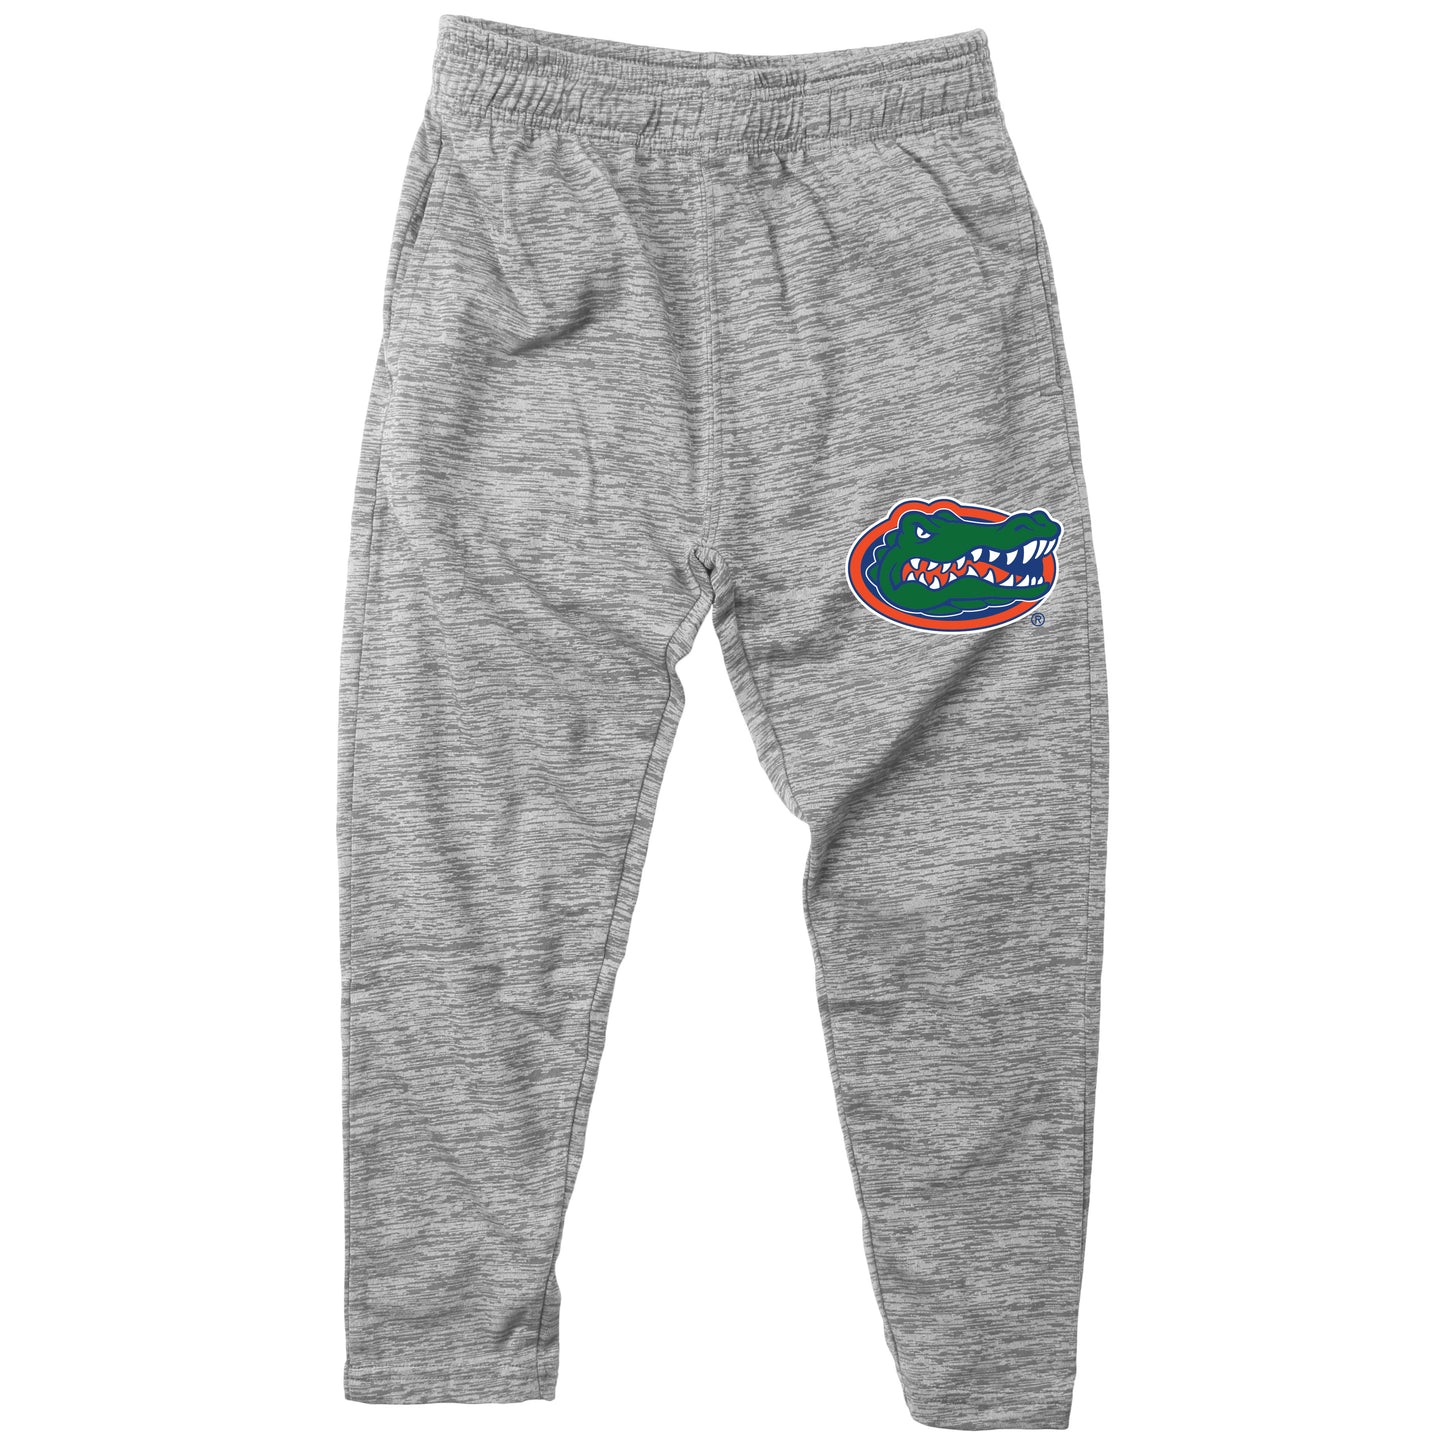 Florida Gators Wes and Willy Youth Boys Cloudy Yarn Athletic Pant